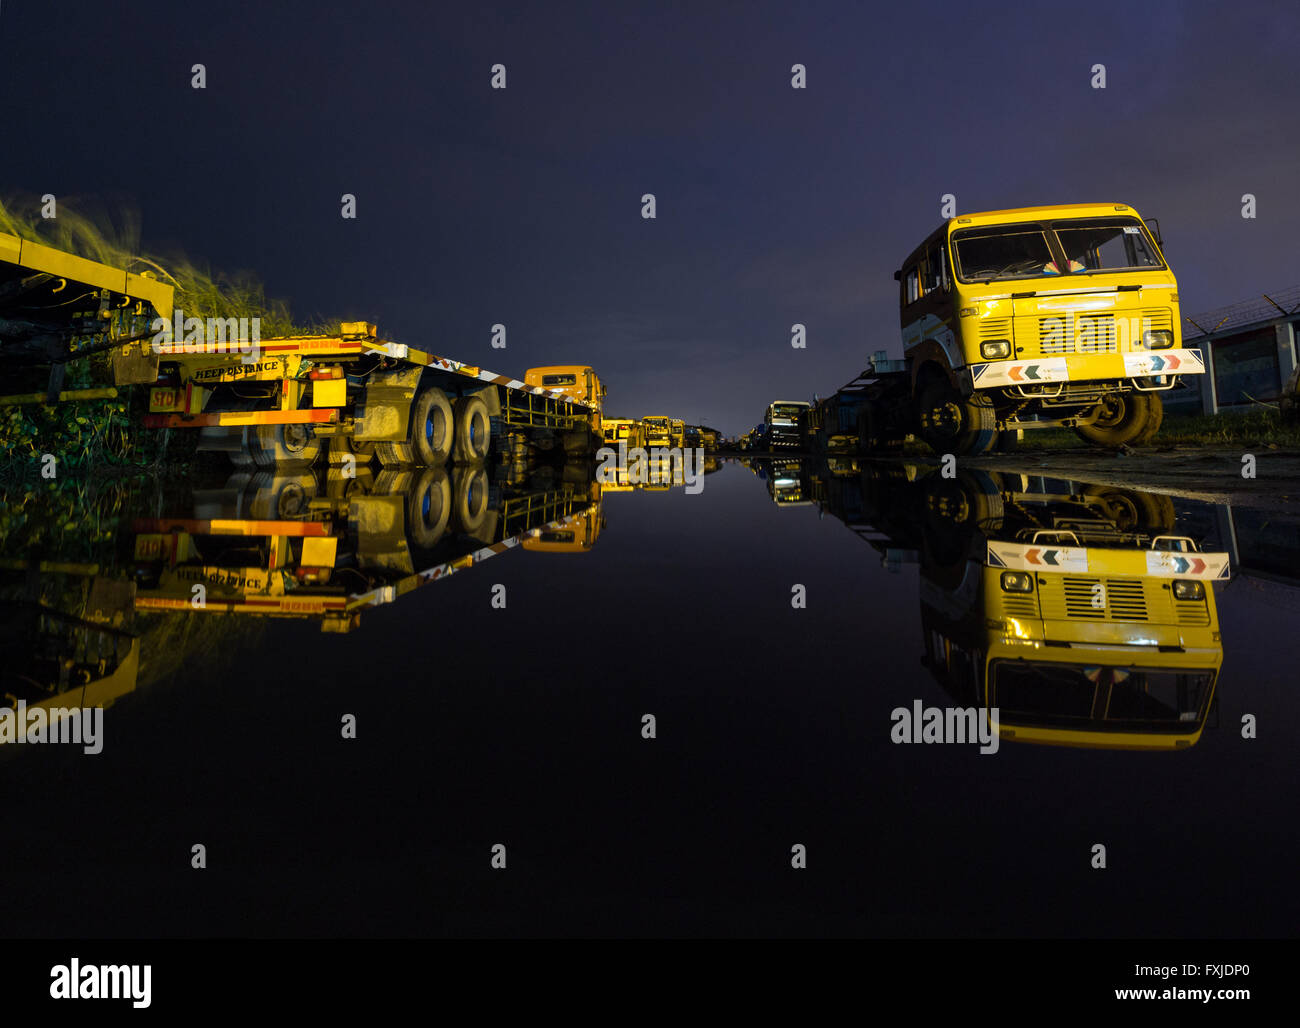 Trucks parked on each side of the road seen reflected on a large puddle. Stock Photo